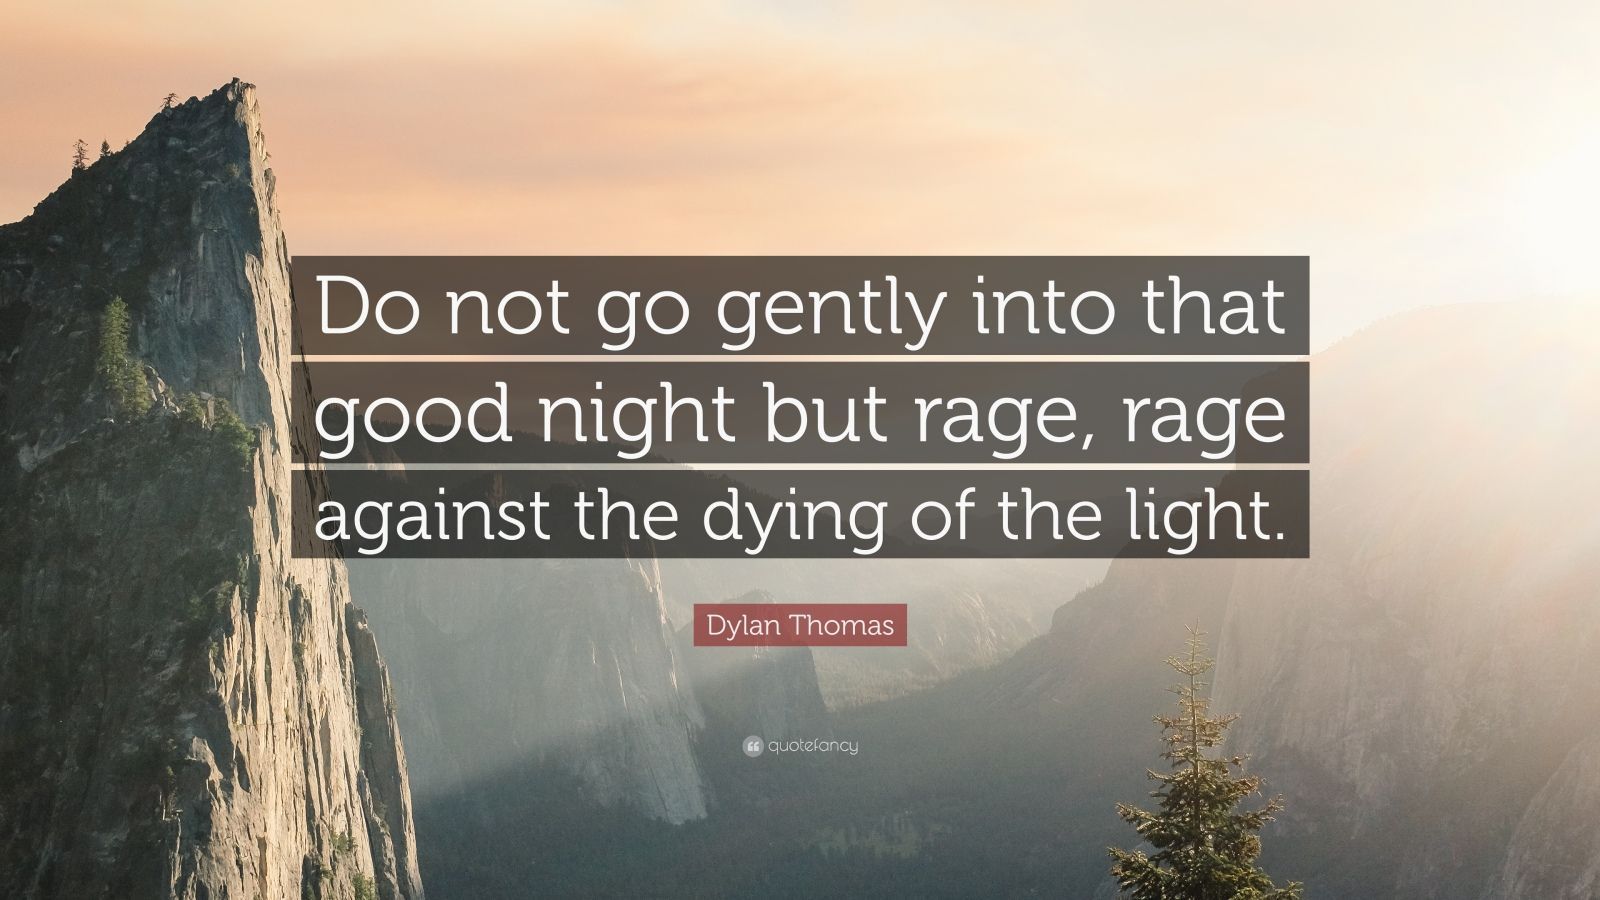 Dylan Thomas Quote: “Do not go gently into that good night but rage, rage against the dying of the light.” (14 wallpaper)